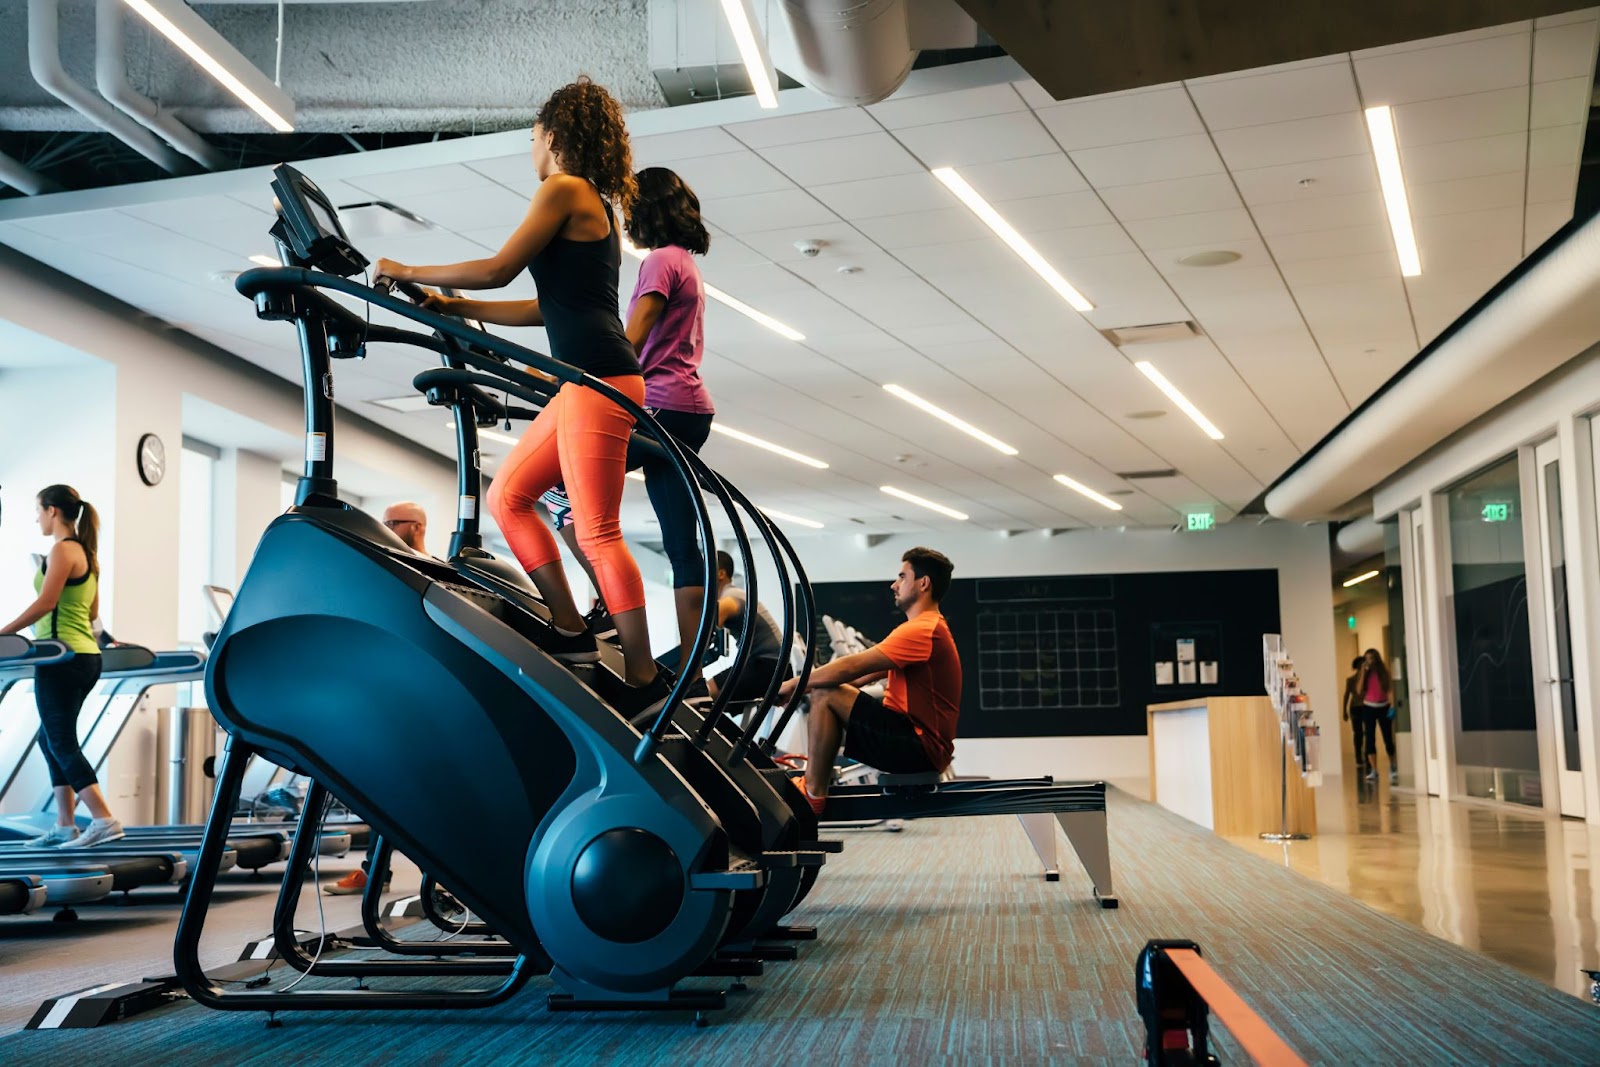 Two fit women working out on stair climbers inside of a fitness studio